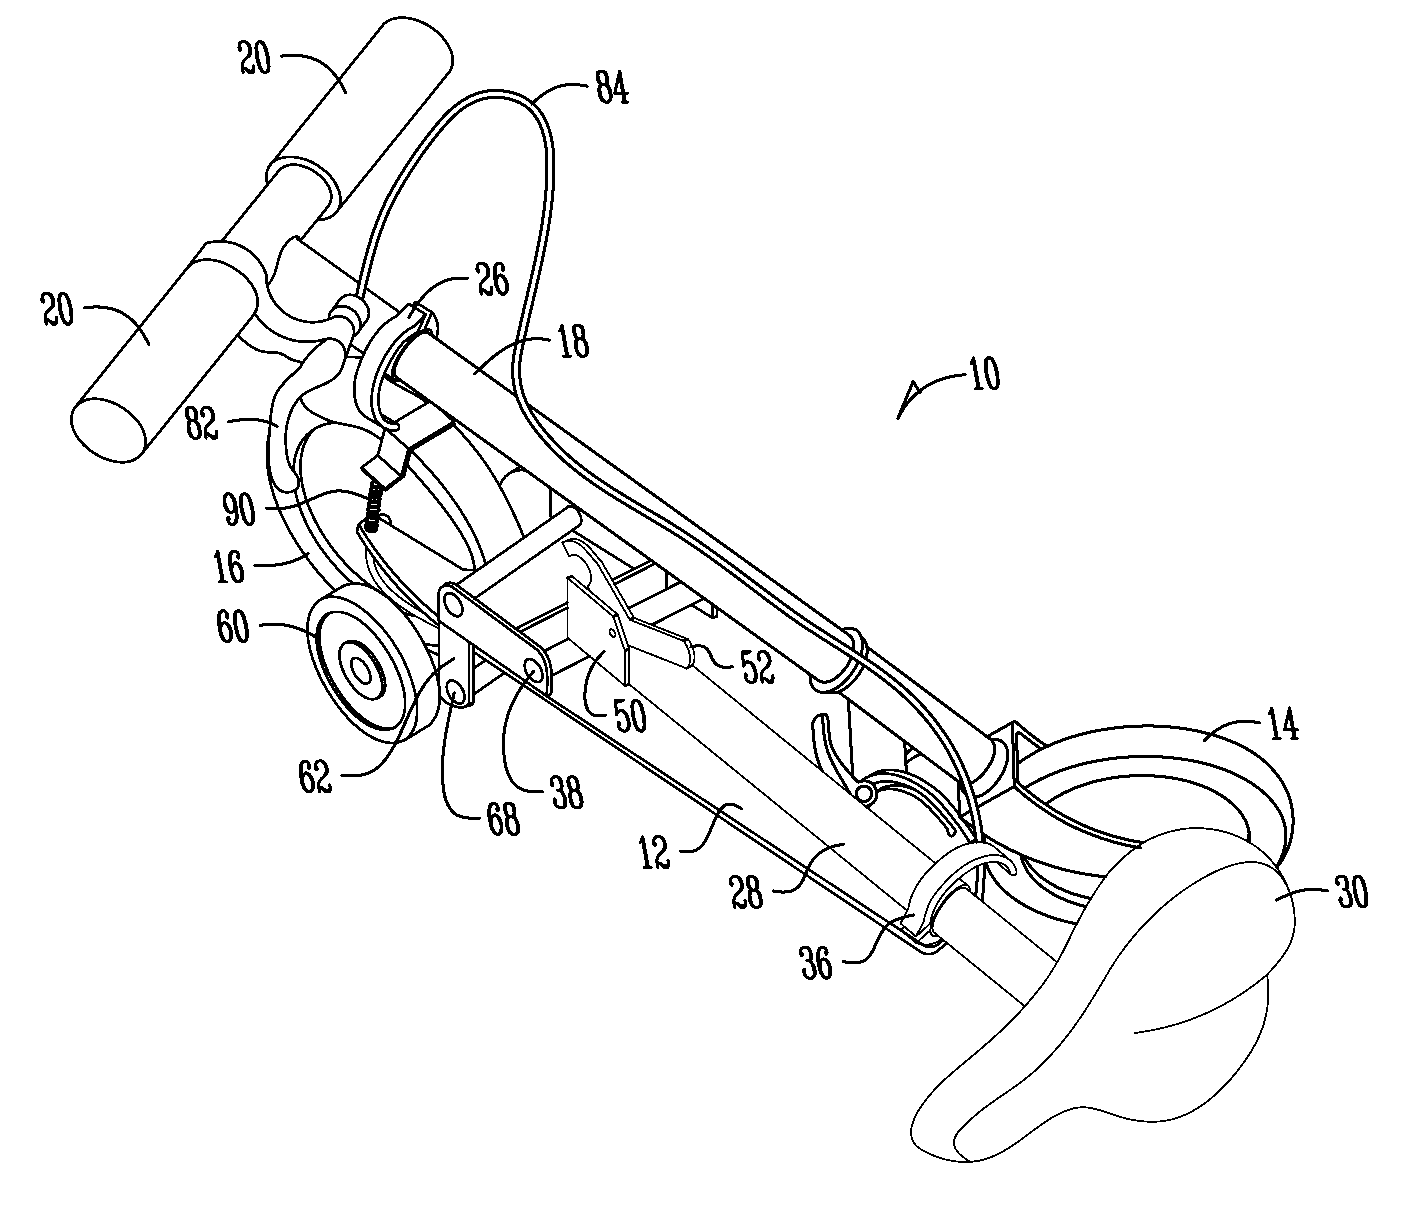 Scooter for seated manual propulsion